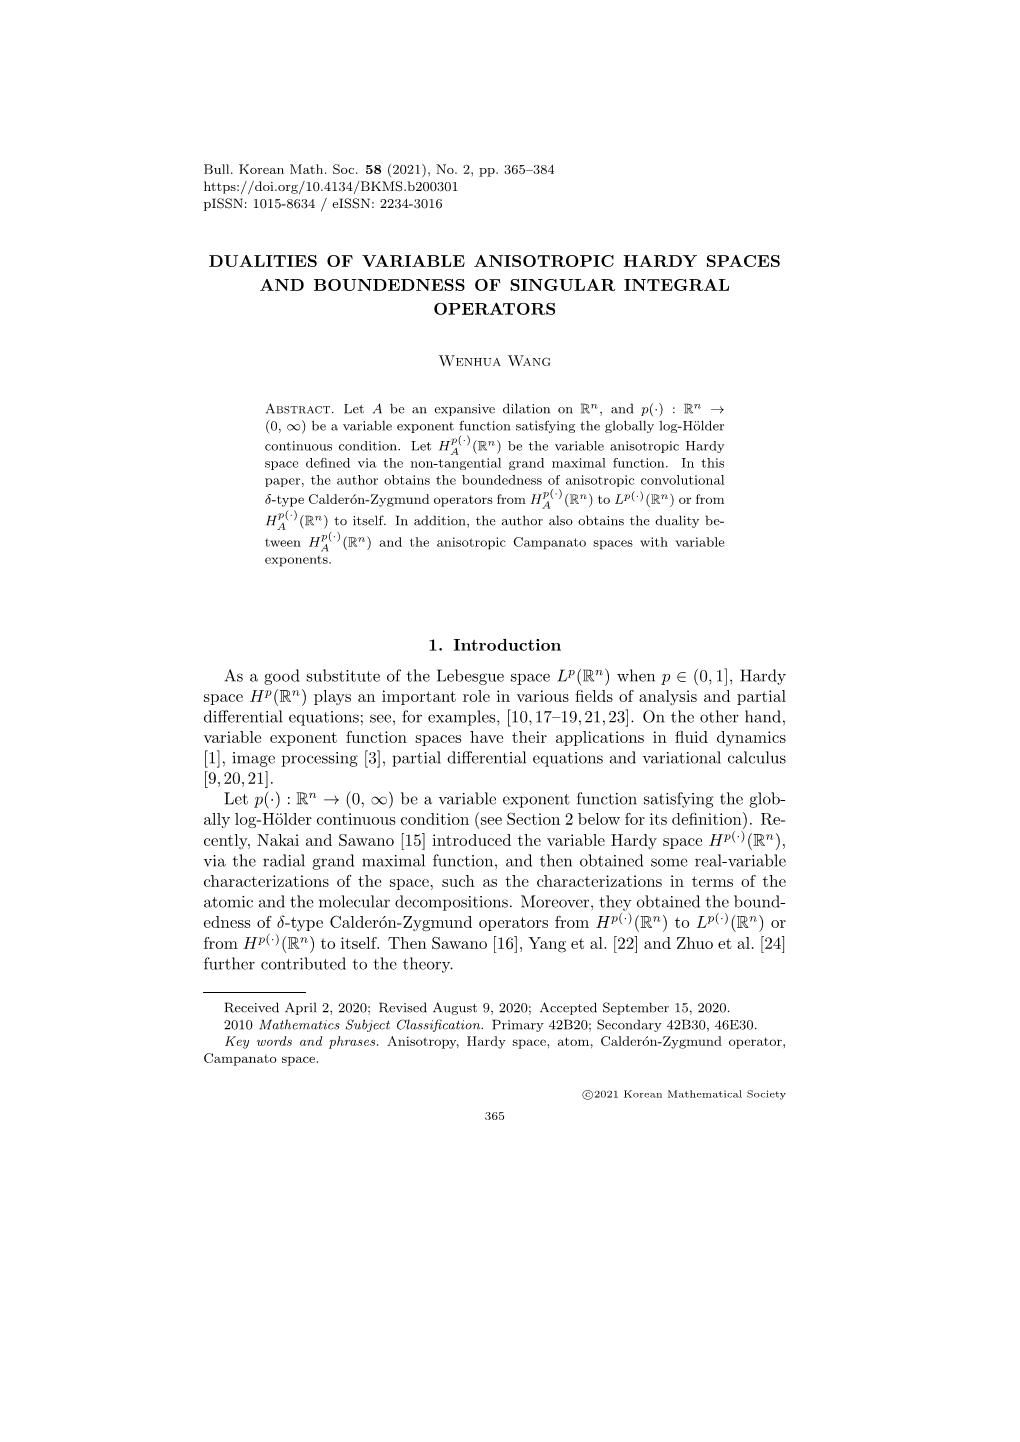 Dualities of Variable Anisotropic Hardy Spaces and Boundedness of Singular Integral Operators